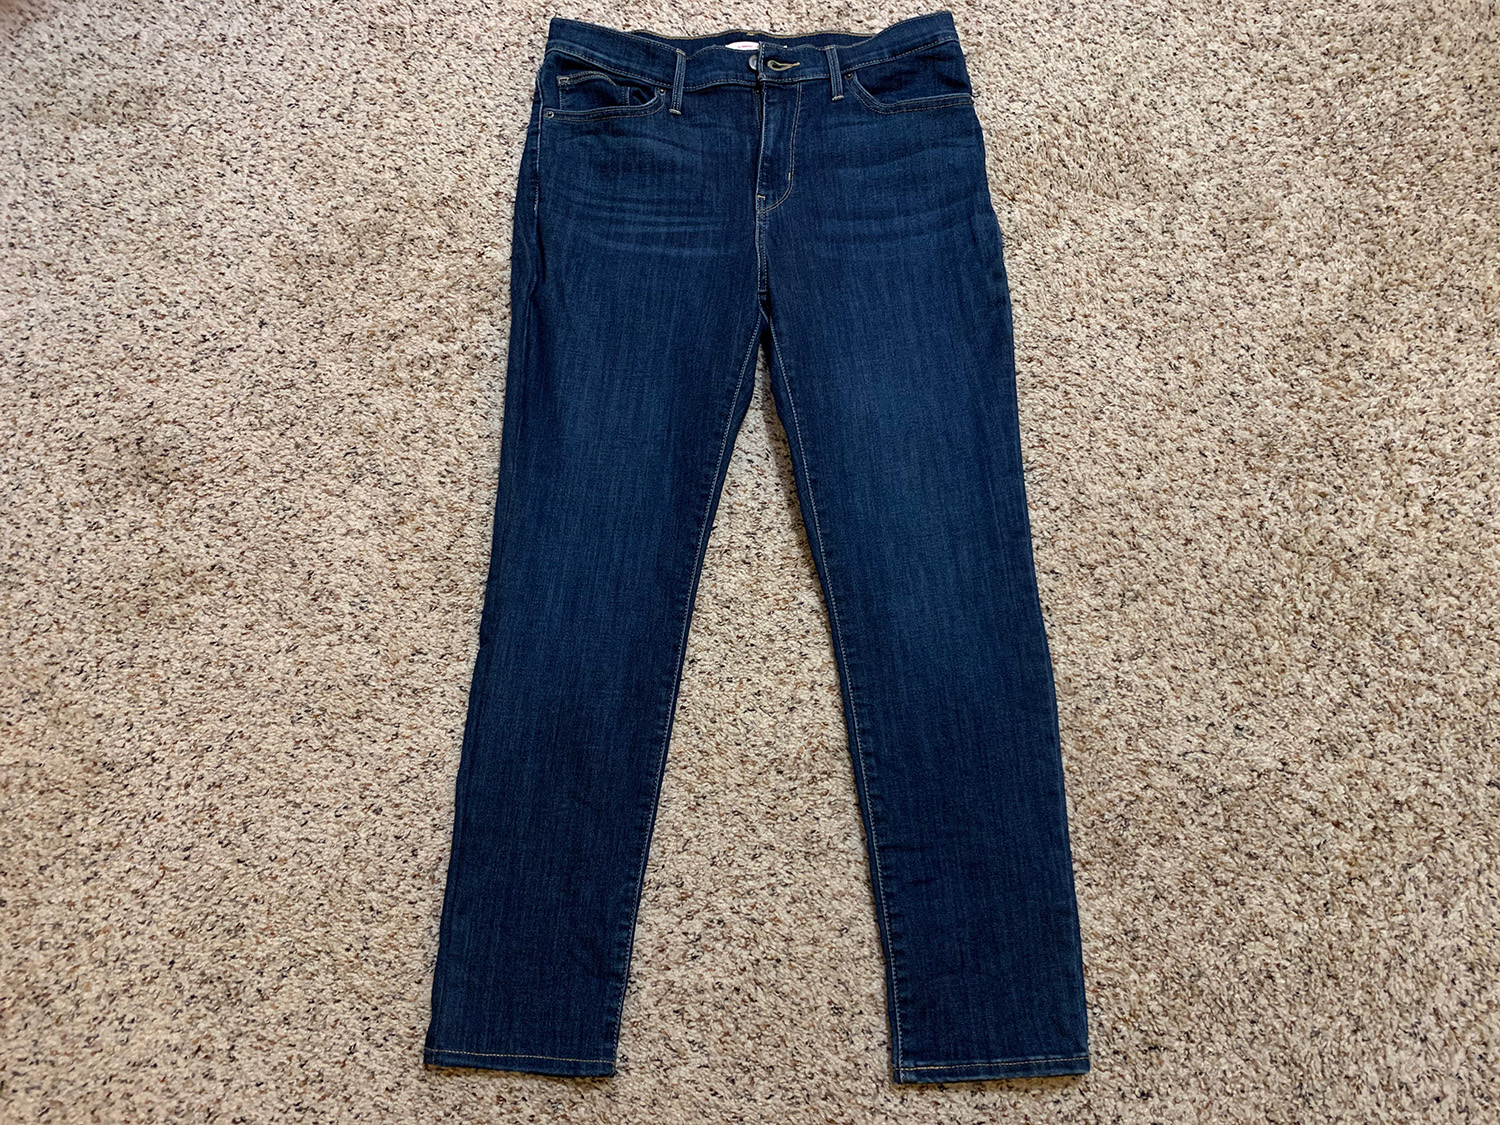 Levis Womens Slimming Skinny Jeans Size 31 at The MenuGem Web Store